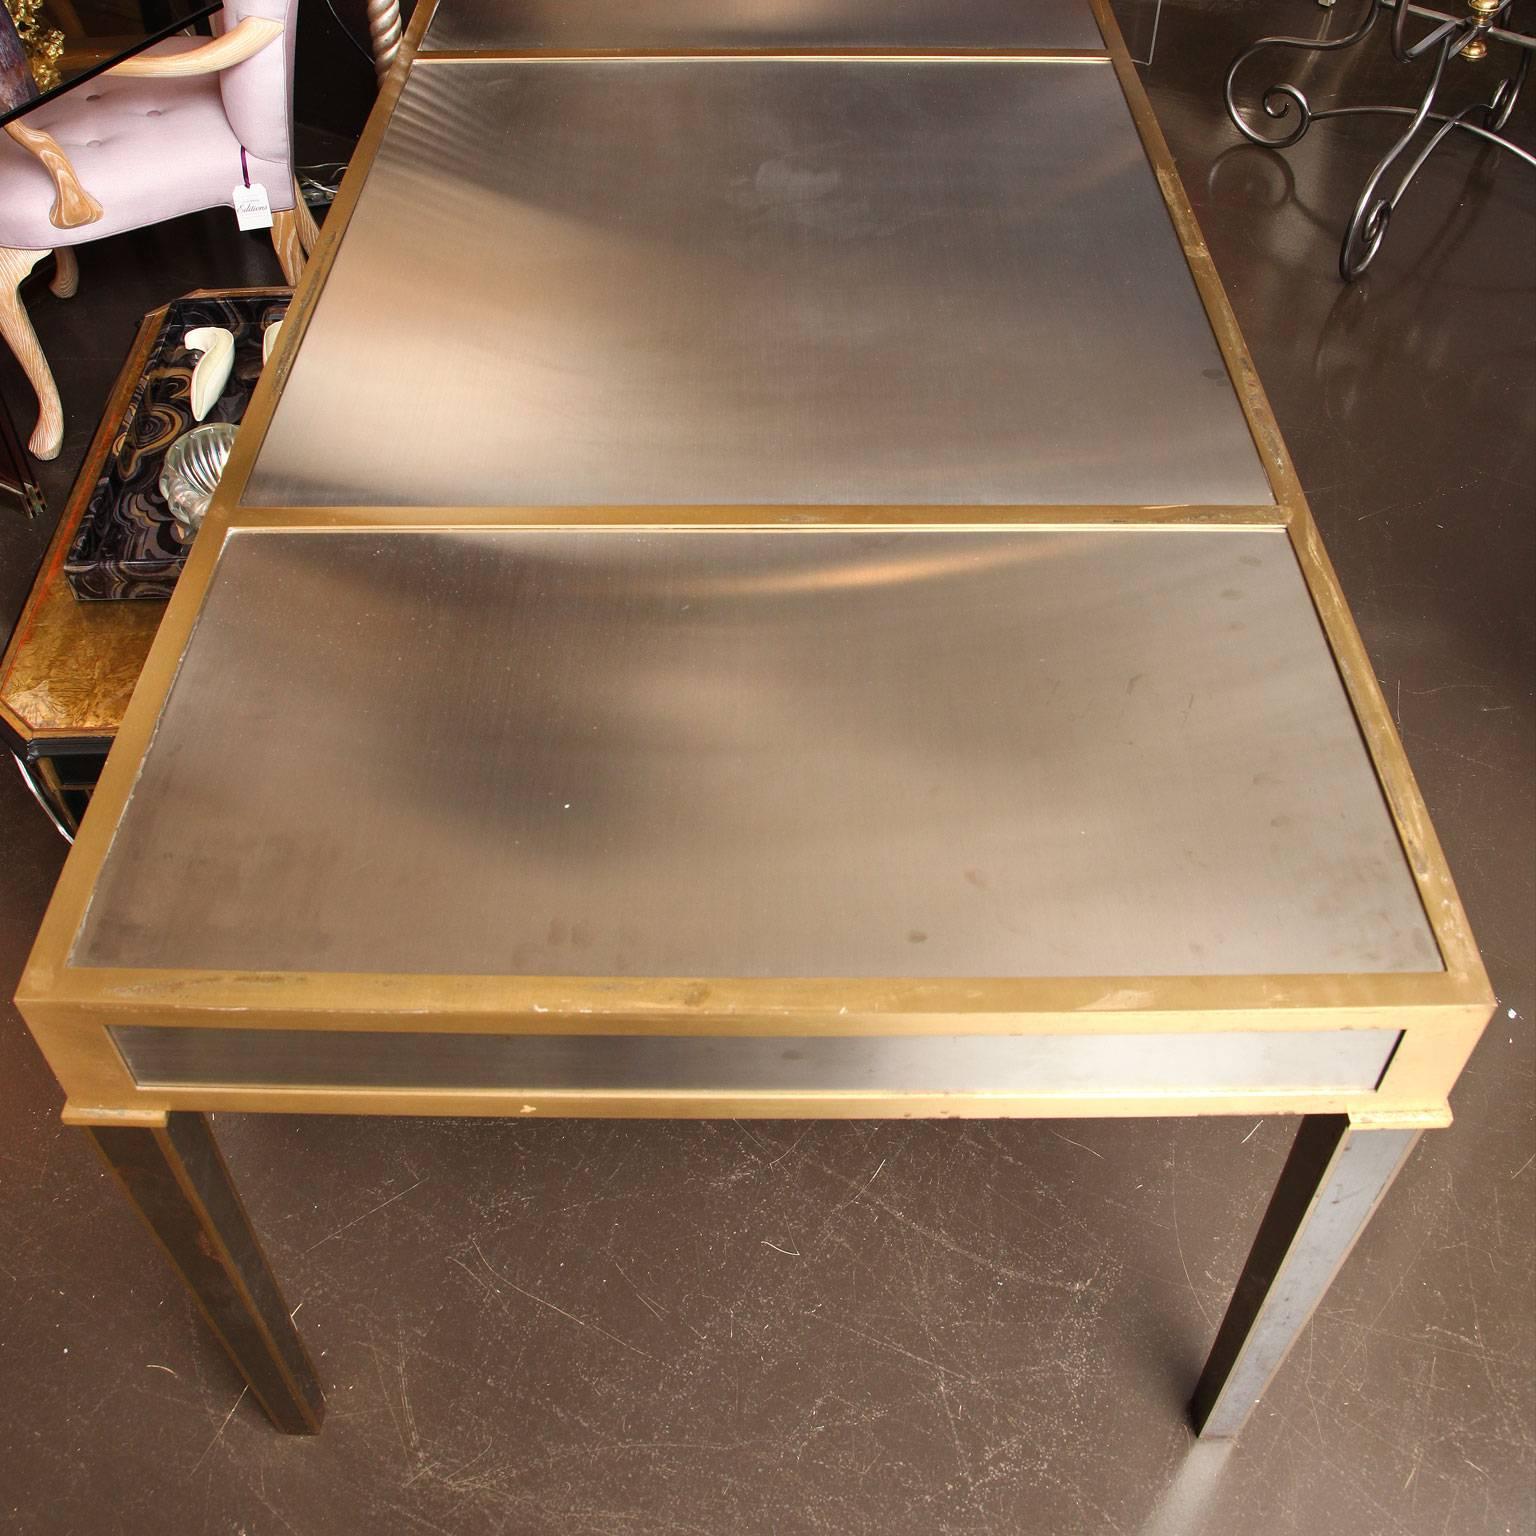 JOHN VESEY (1925-1992)
Large partner’s desk in brushed steel and bronze with six drawers and tapered legs. There are two small and one large drawers on either side.
American, 1965

PROVENANCE
Estate of Sam and Grayson Hall, Wildercliff,